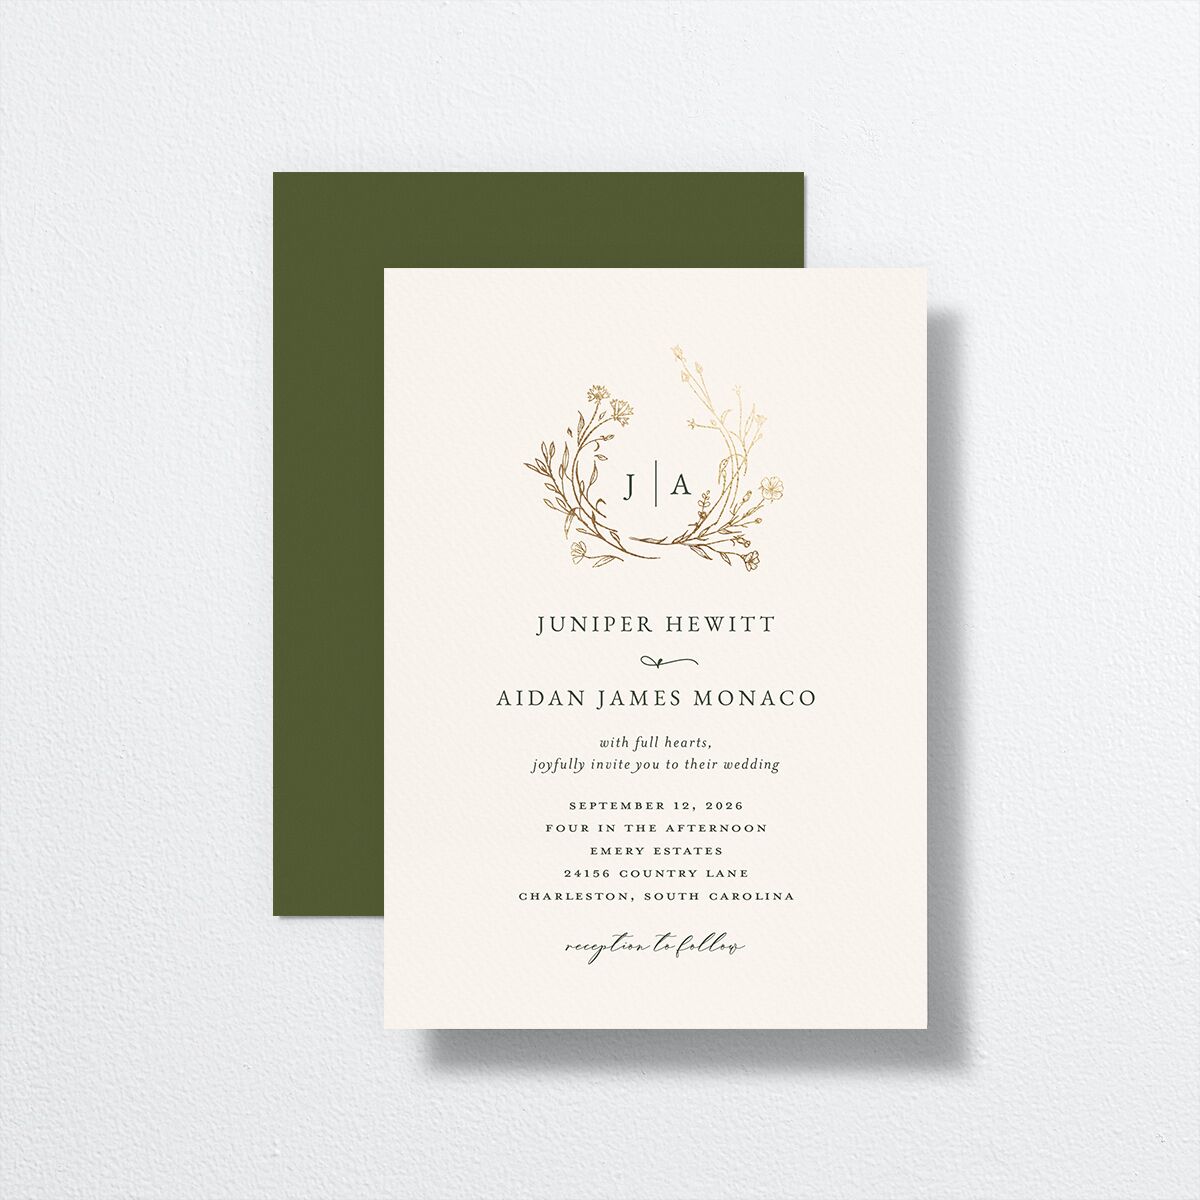 Gilded Monogram Wedding Invitations front-and-back in green